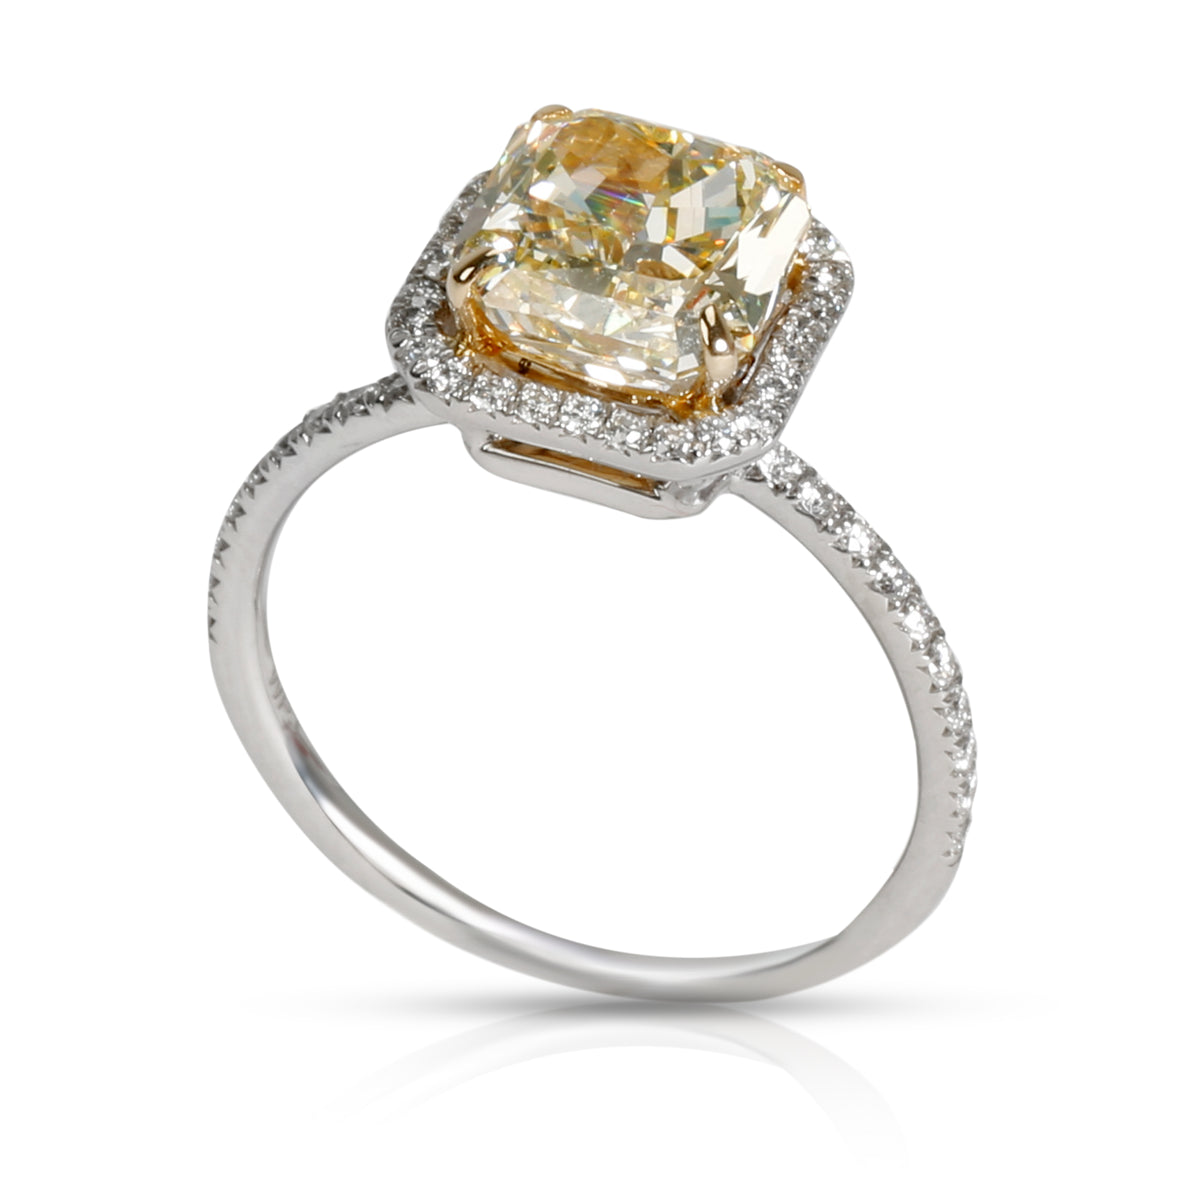 GIA Certified Fancy Yellow Radiant Diamond Engagement Ring VVS2 (2.82 CTW)